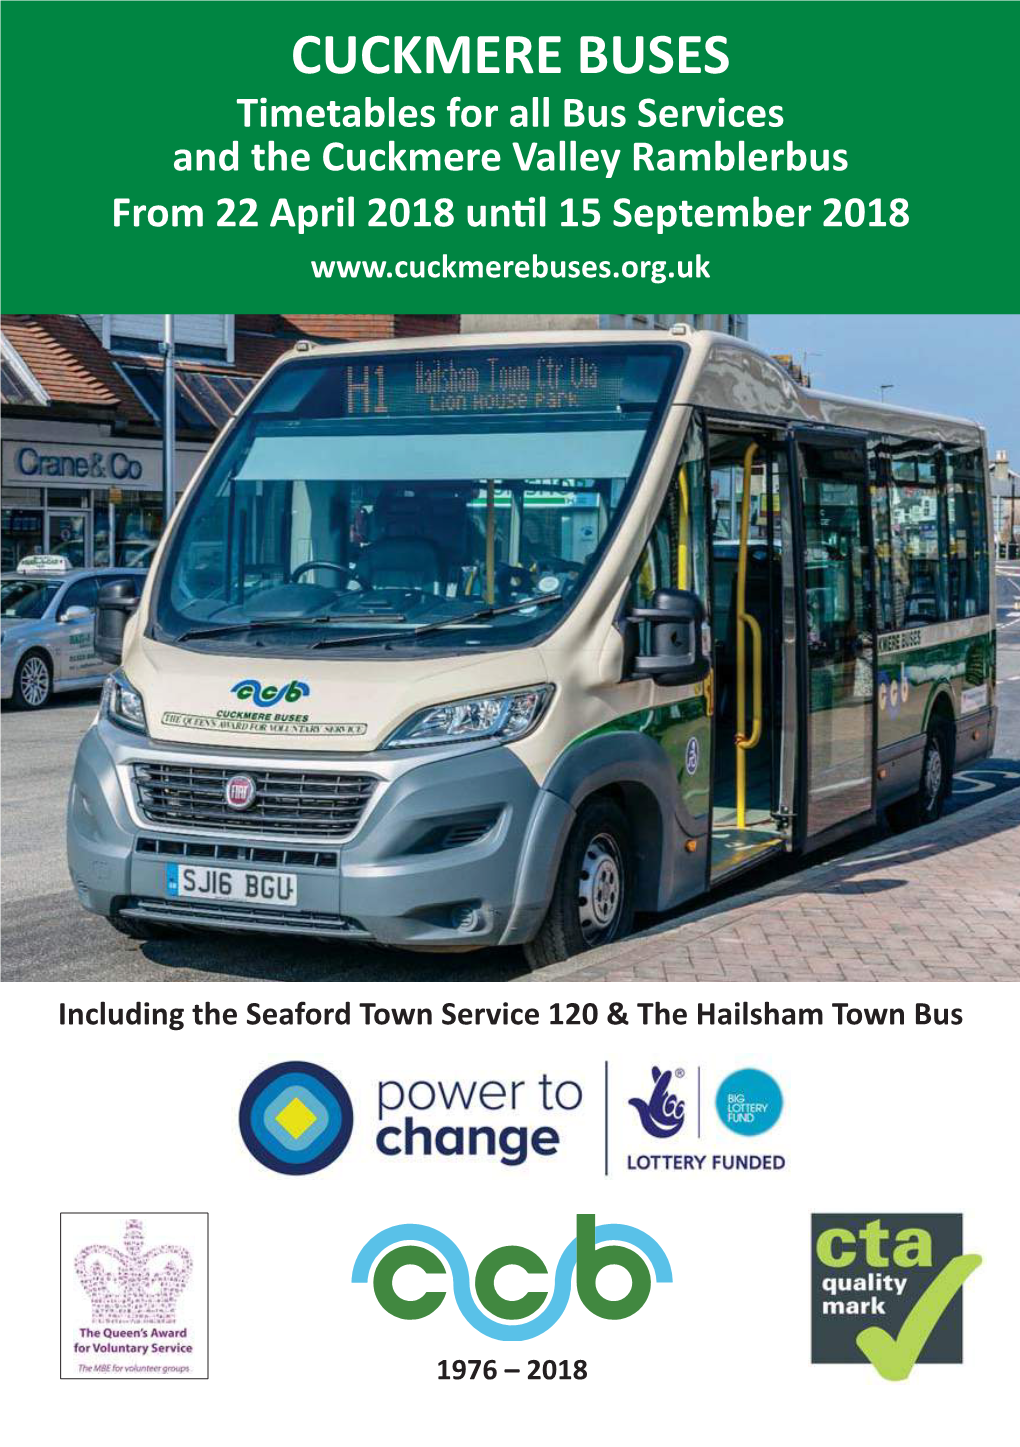 CUCKMERE BUSES - Timetable [28.03.18].Qxp Layout 1 28/03/2018 13:36 Page 1